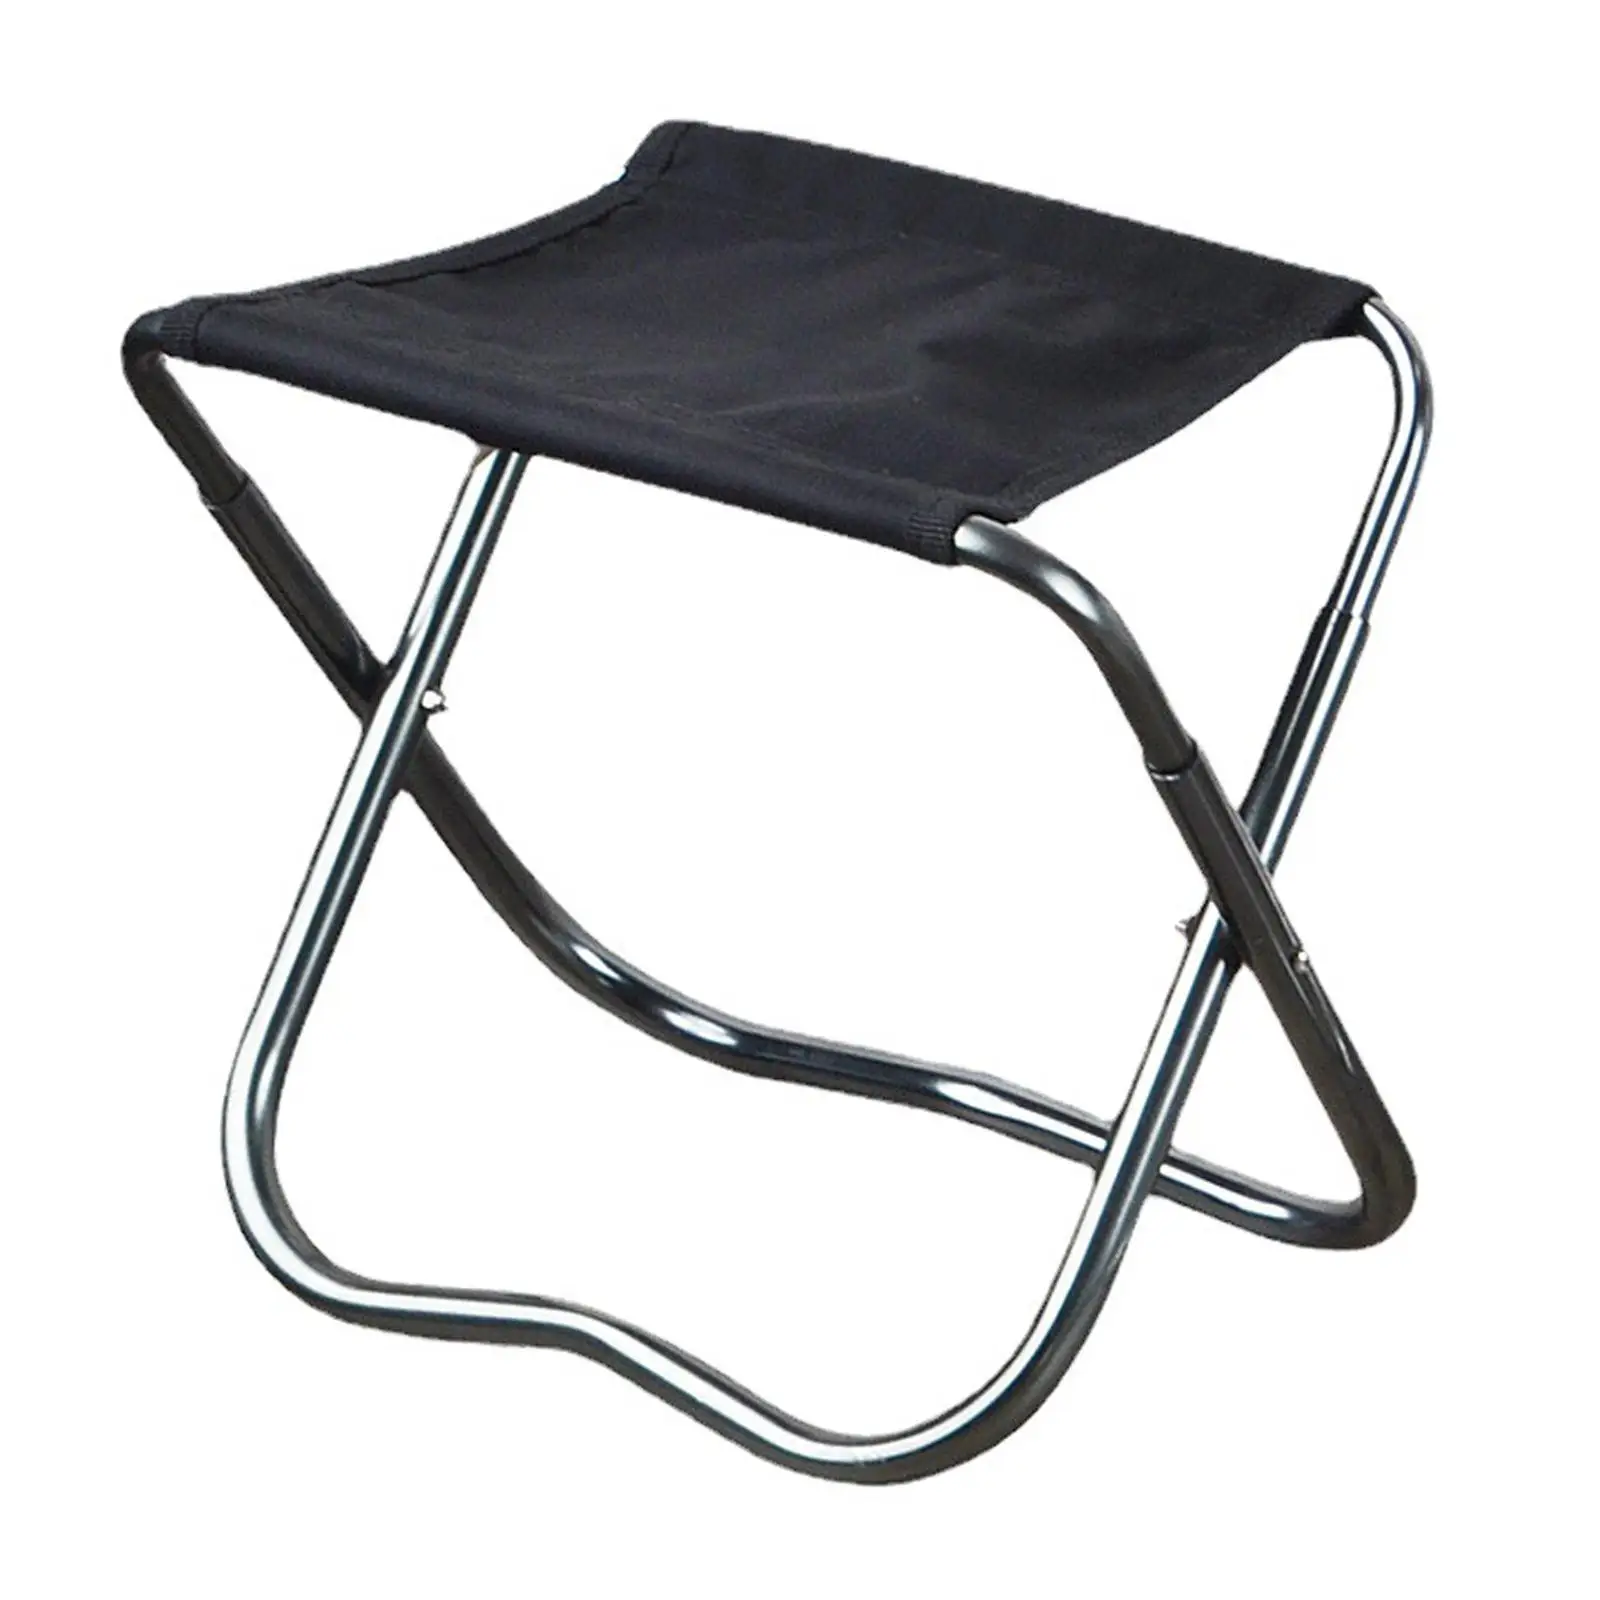 Camping Chair Easy to Carry Outdoor Multipurpose Collapsible Camping Stool Fishing Chair for Barbecue Camping Picnic Lawn Garden